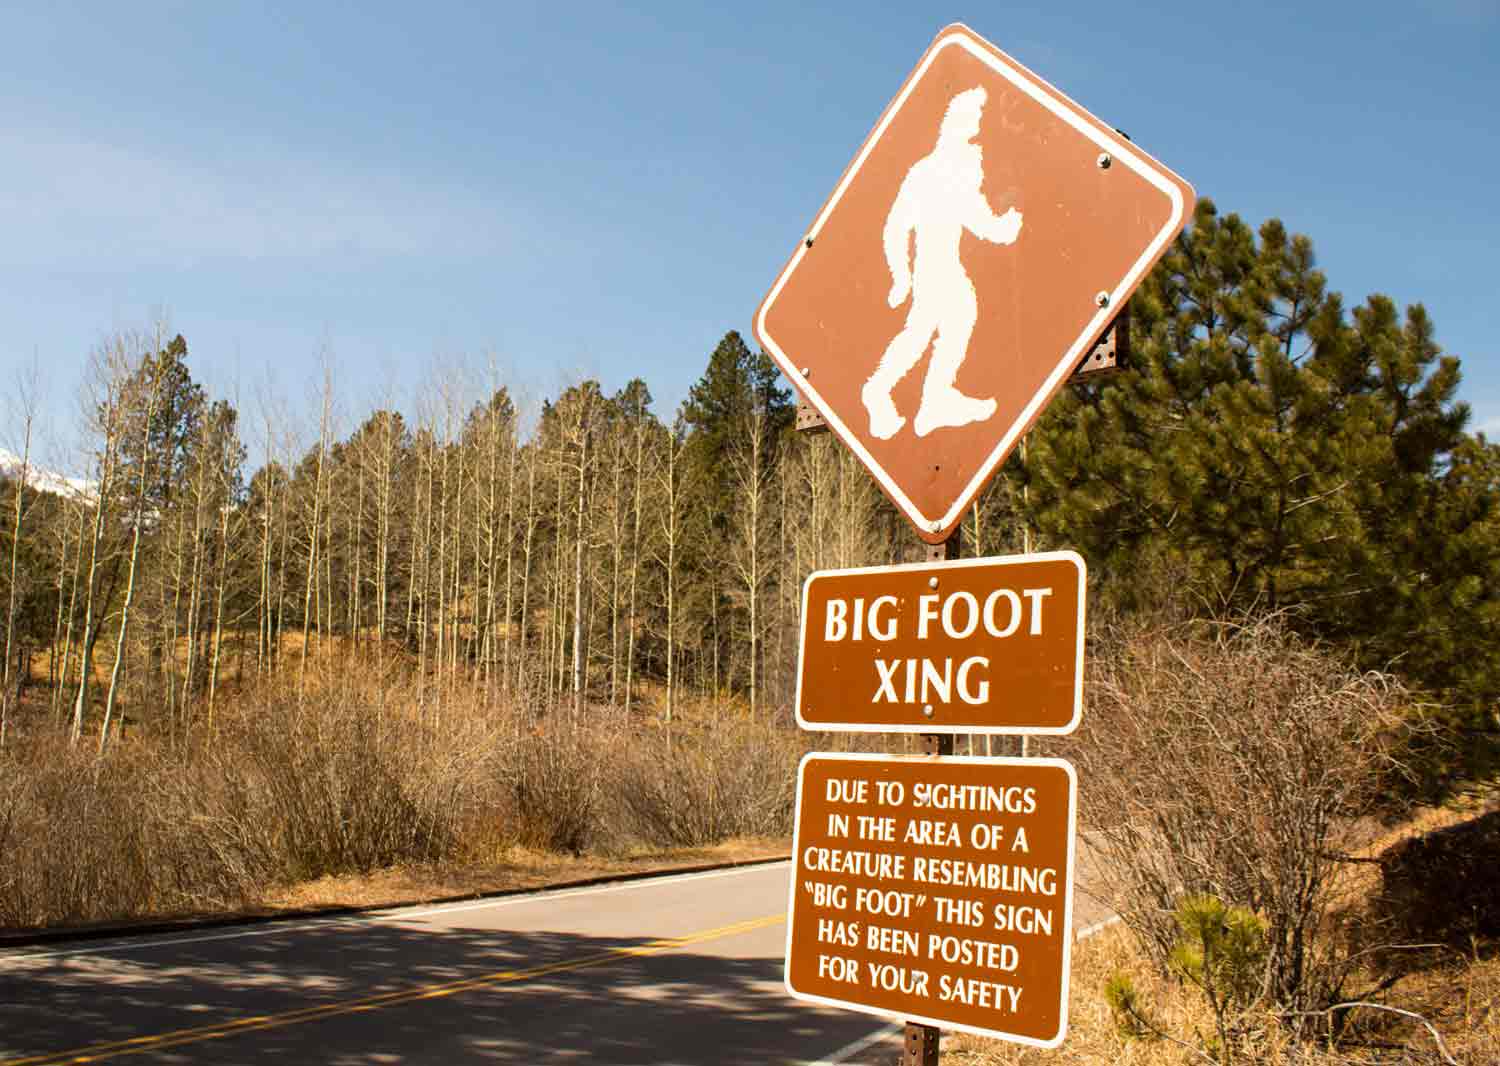 Road signs show an outline of a hair creature and a message stating that Bigfoot has been seen in the area.